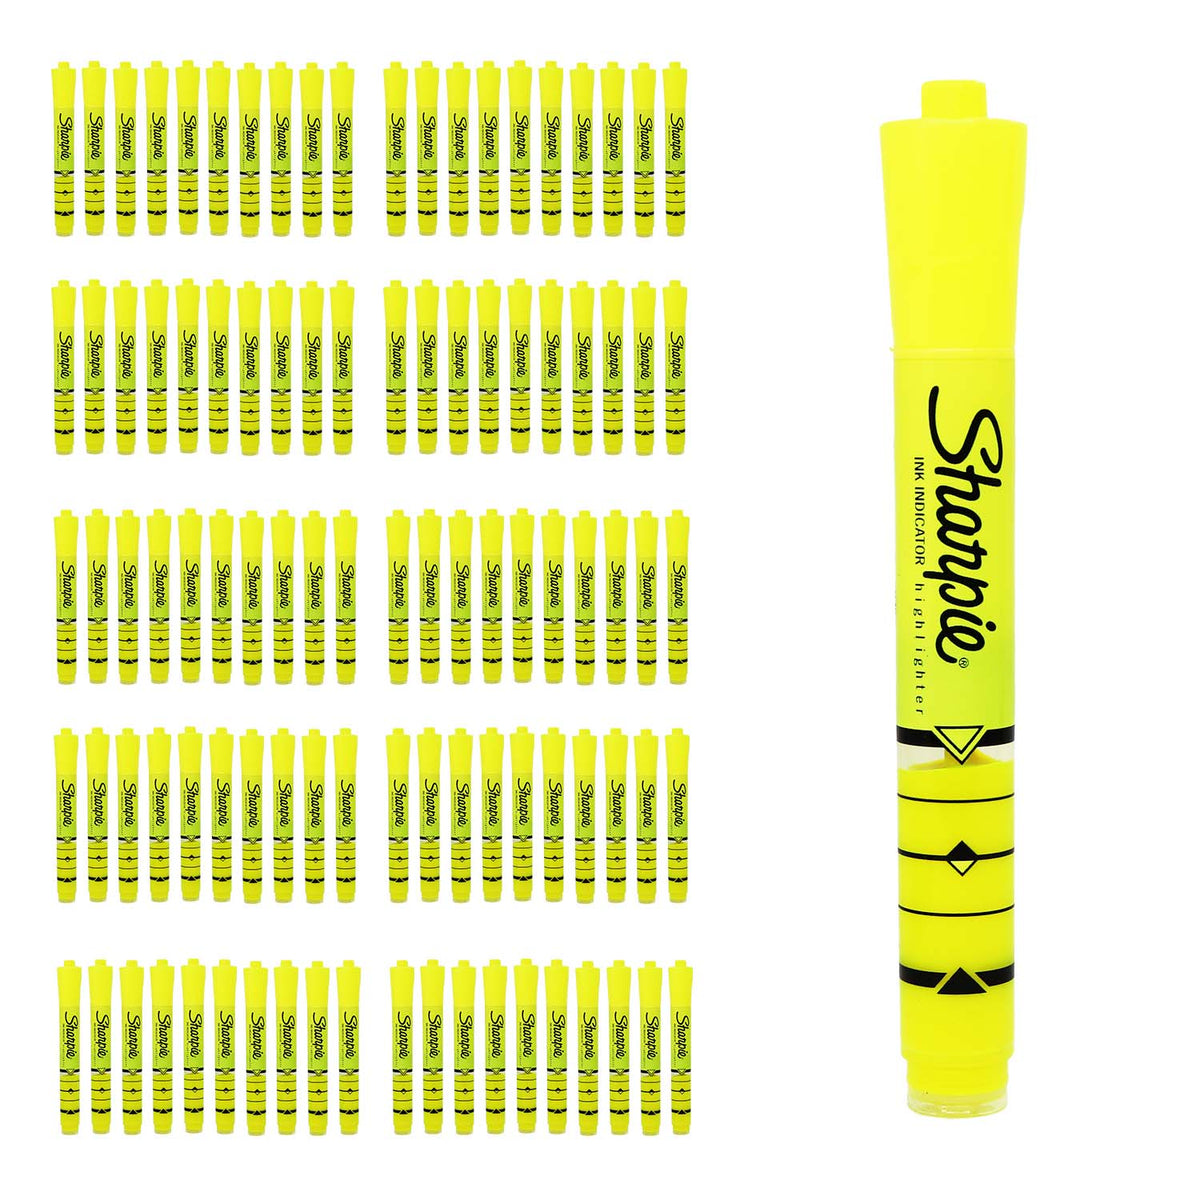 Buy 200 Ink Indicator Highlighters in Yellow - Bulk School Supplies Wholesale Case of 200 -Ink Indicator Highlighters